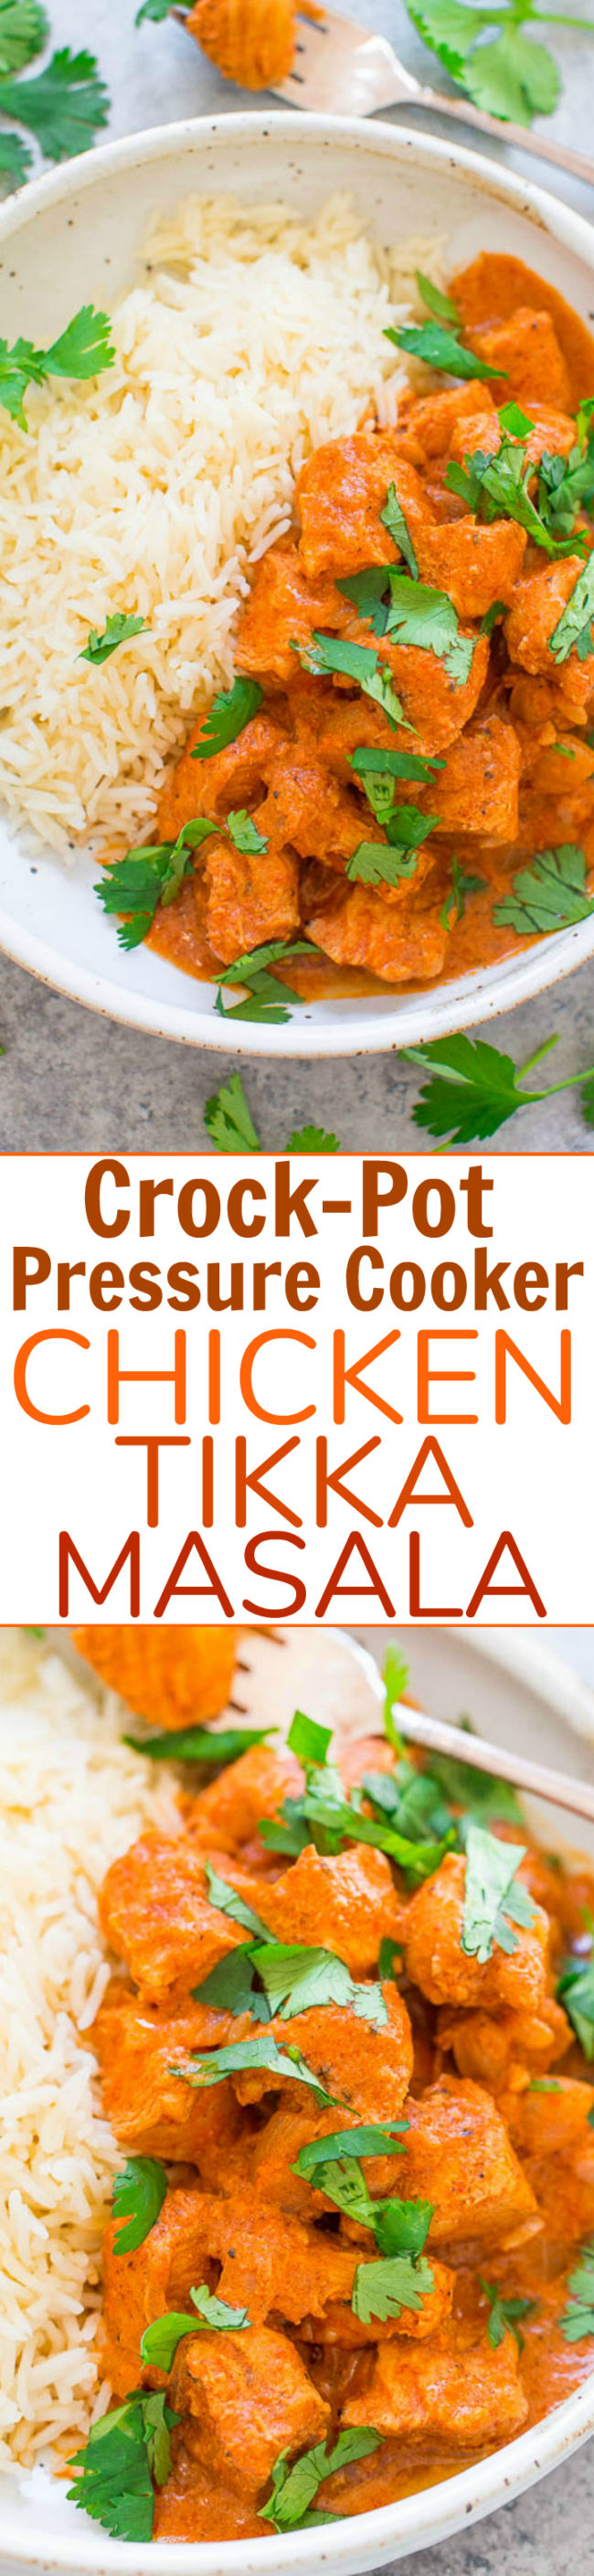 Pressure Cooker Chicken Tikka Masala - Make this Indian favorite at home in 30 minutes in your pressure cooker, or make it in your slow cooker!! Juicy chicken is coated with an ultra FLAVORFUL creamy sauce! You don't need to go to a restaurant because this EASY recipe tastes BETTER!!